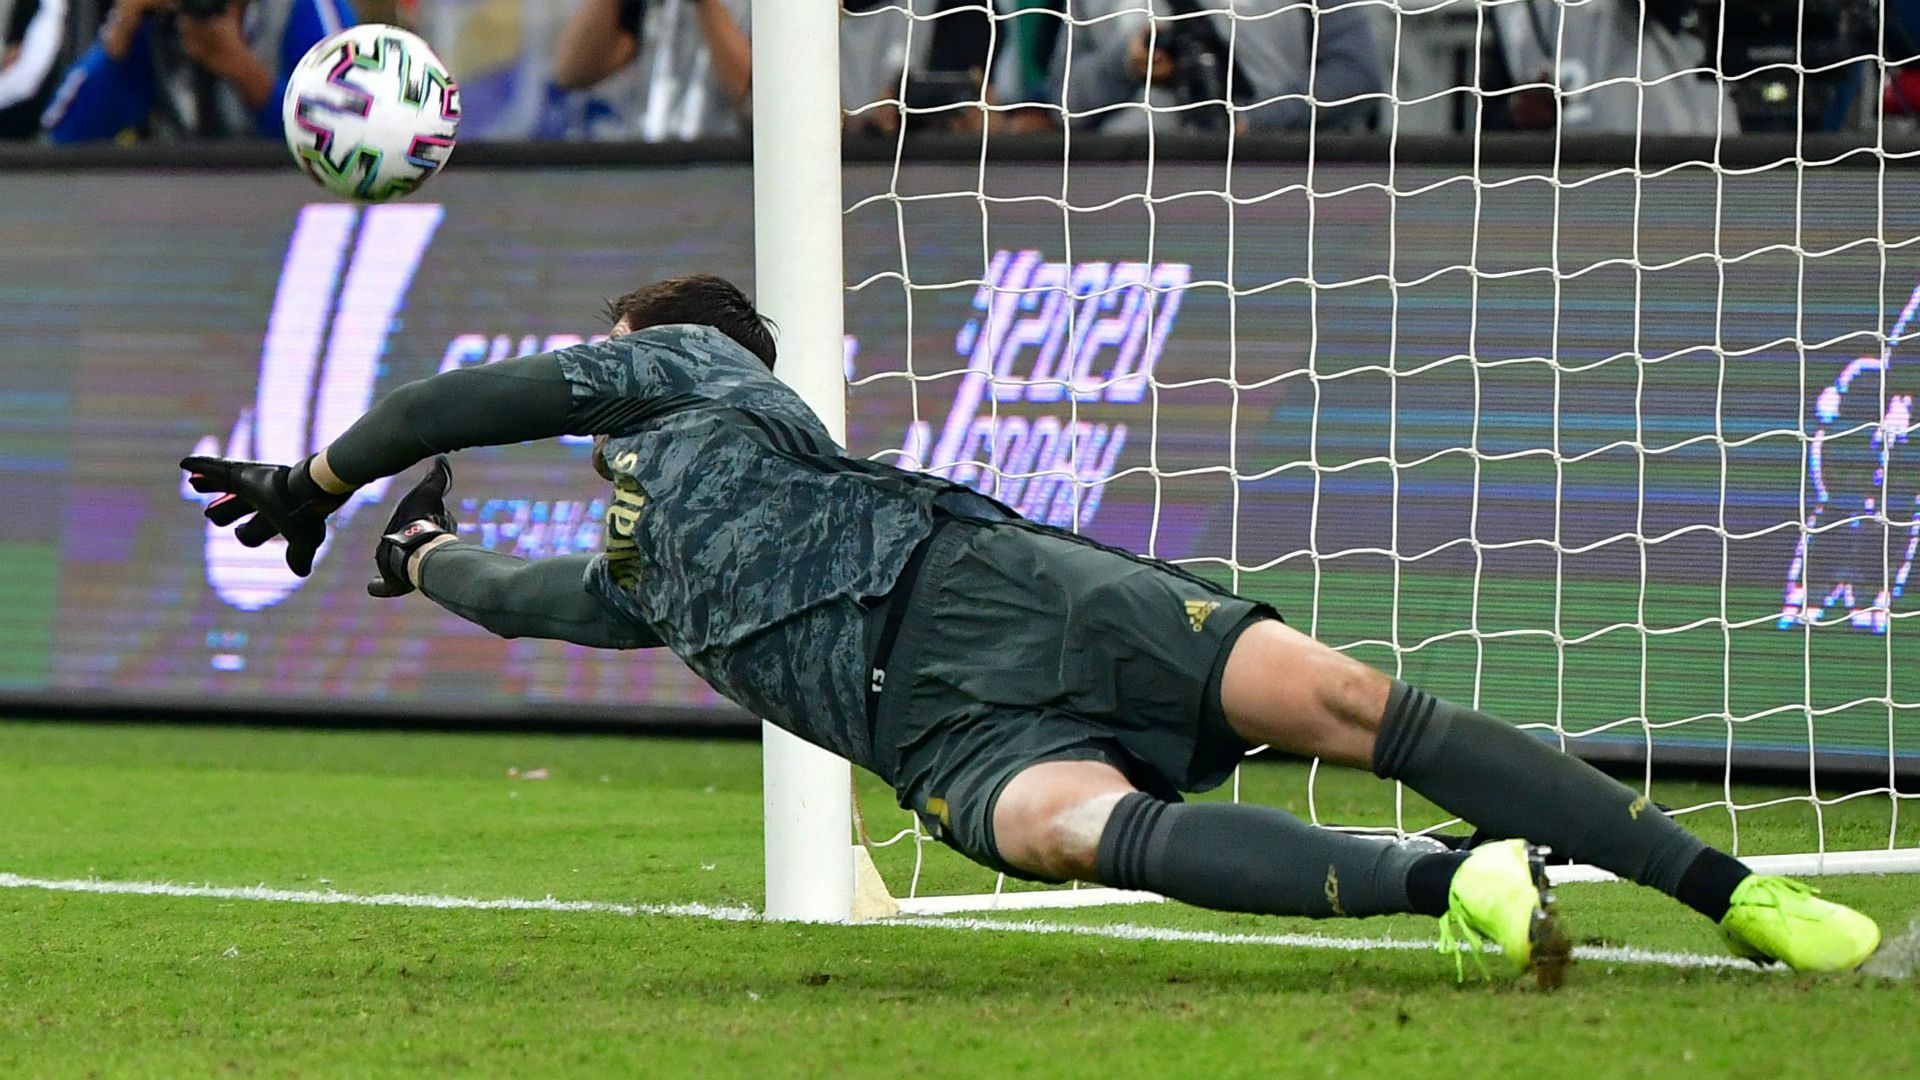 From zero to hero: Courtois completes Real resurgence in Supercopa shootout